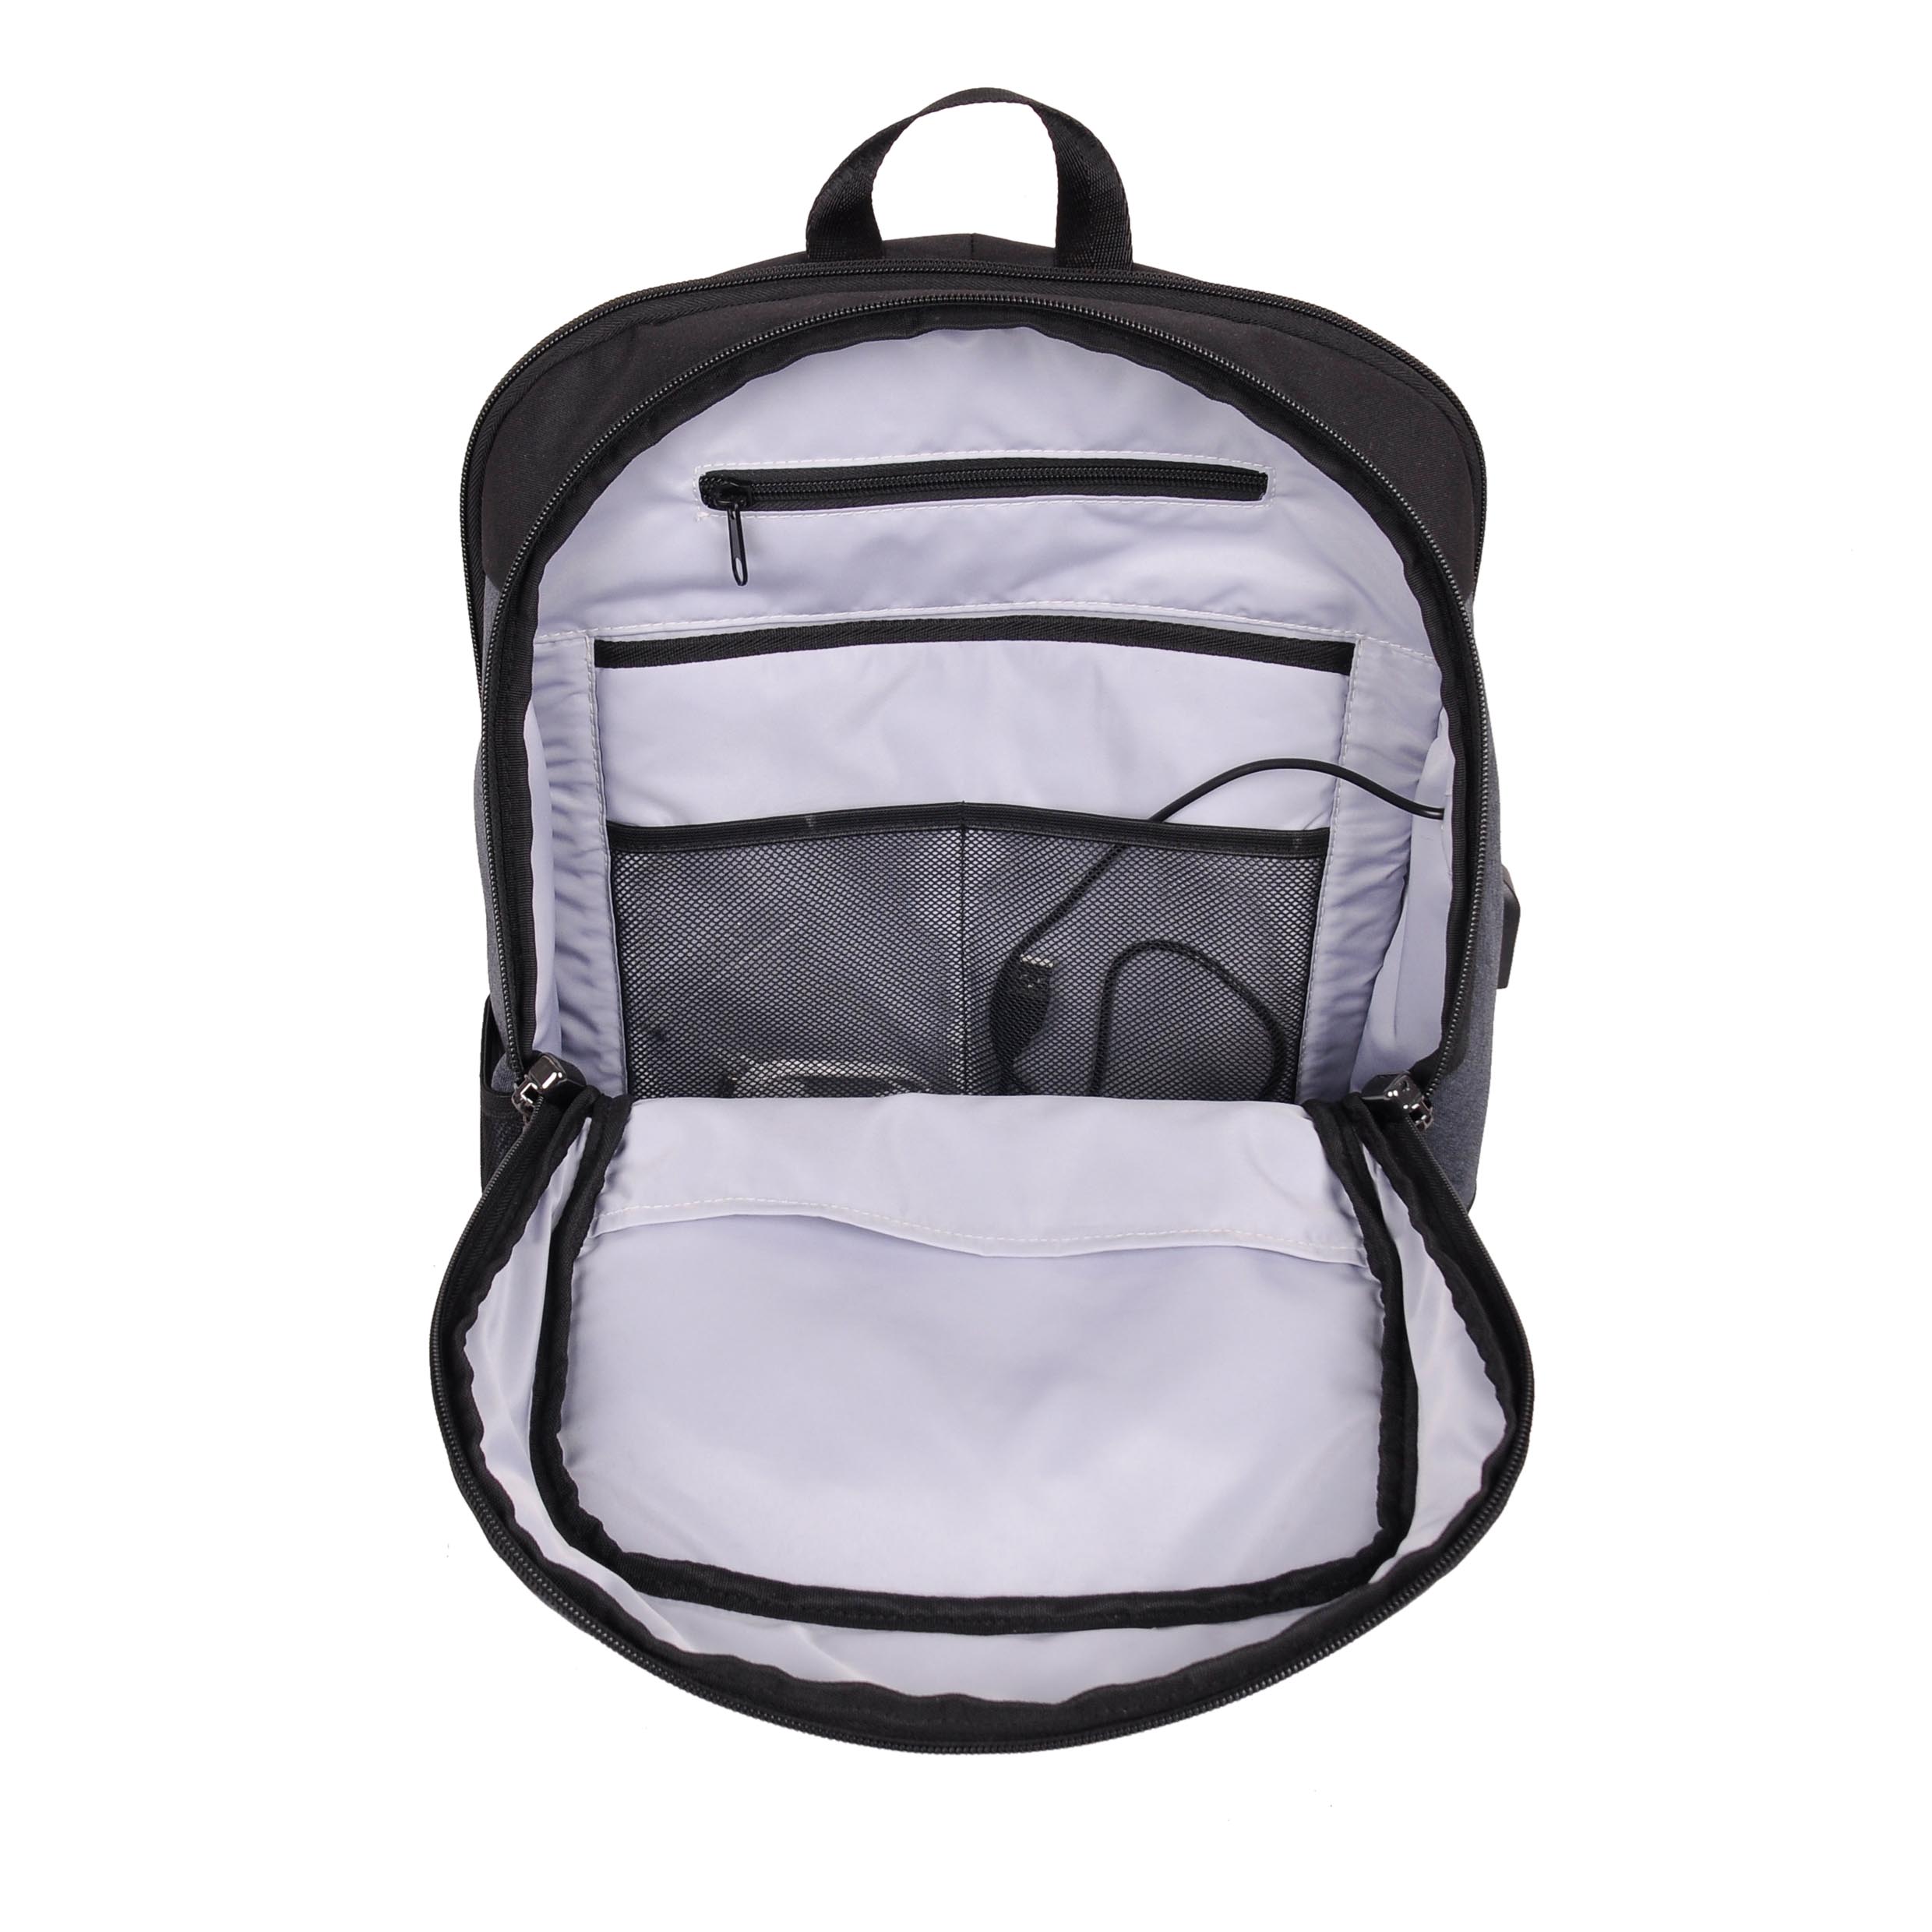 OEM Anti Theft Laptop Backpack